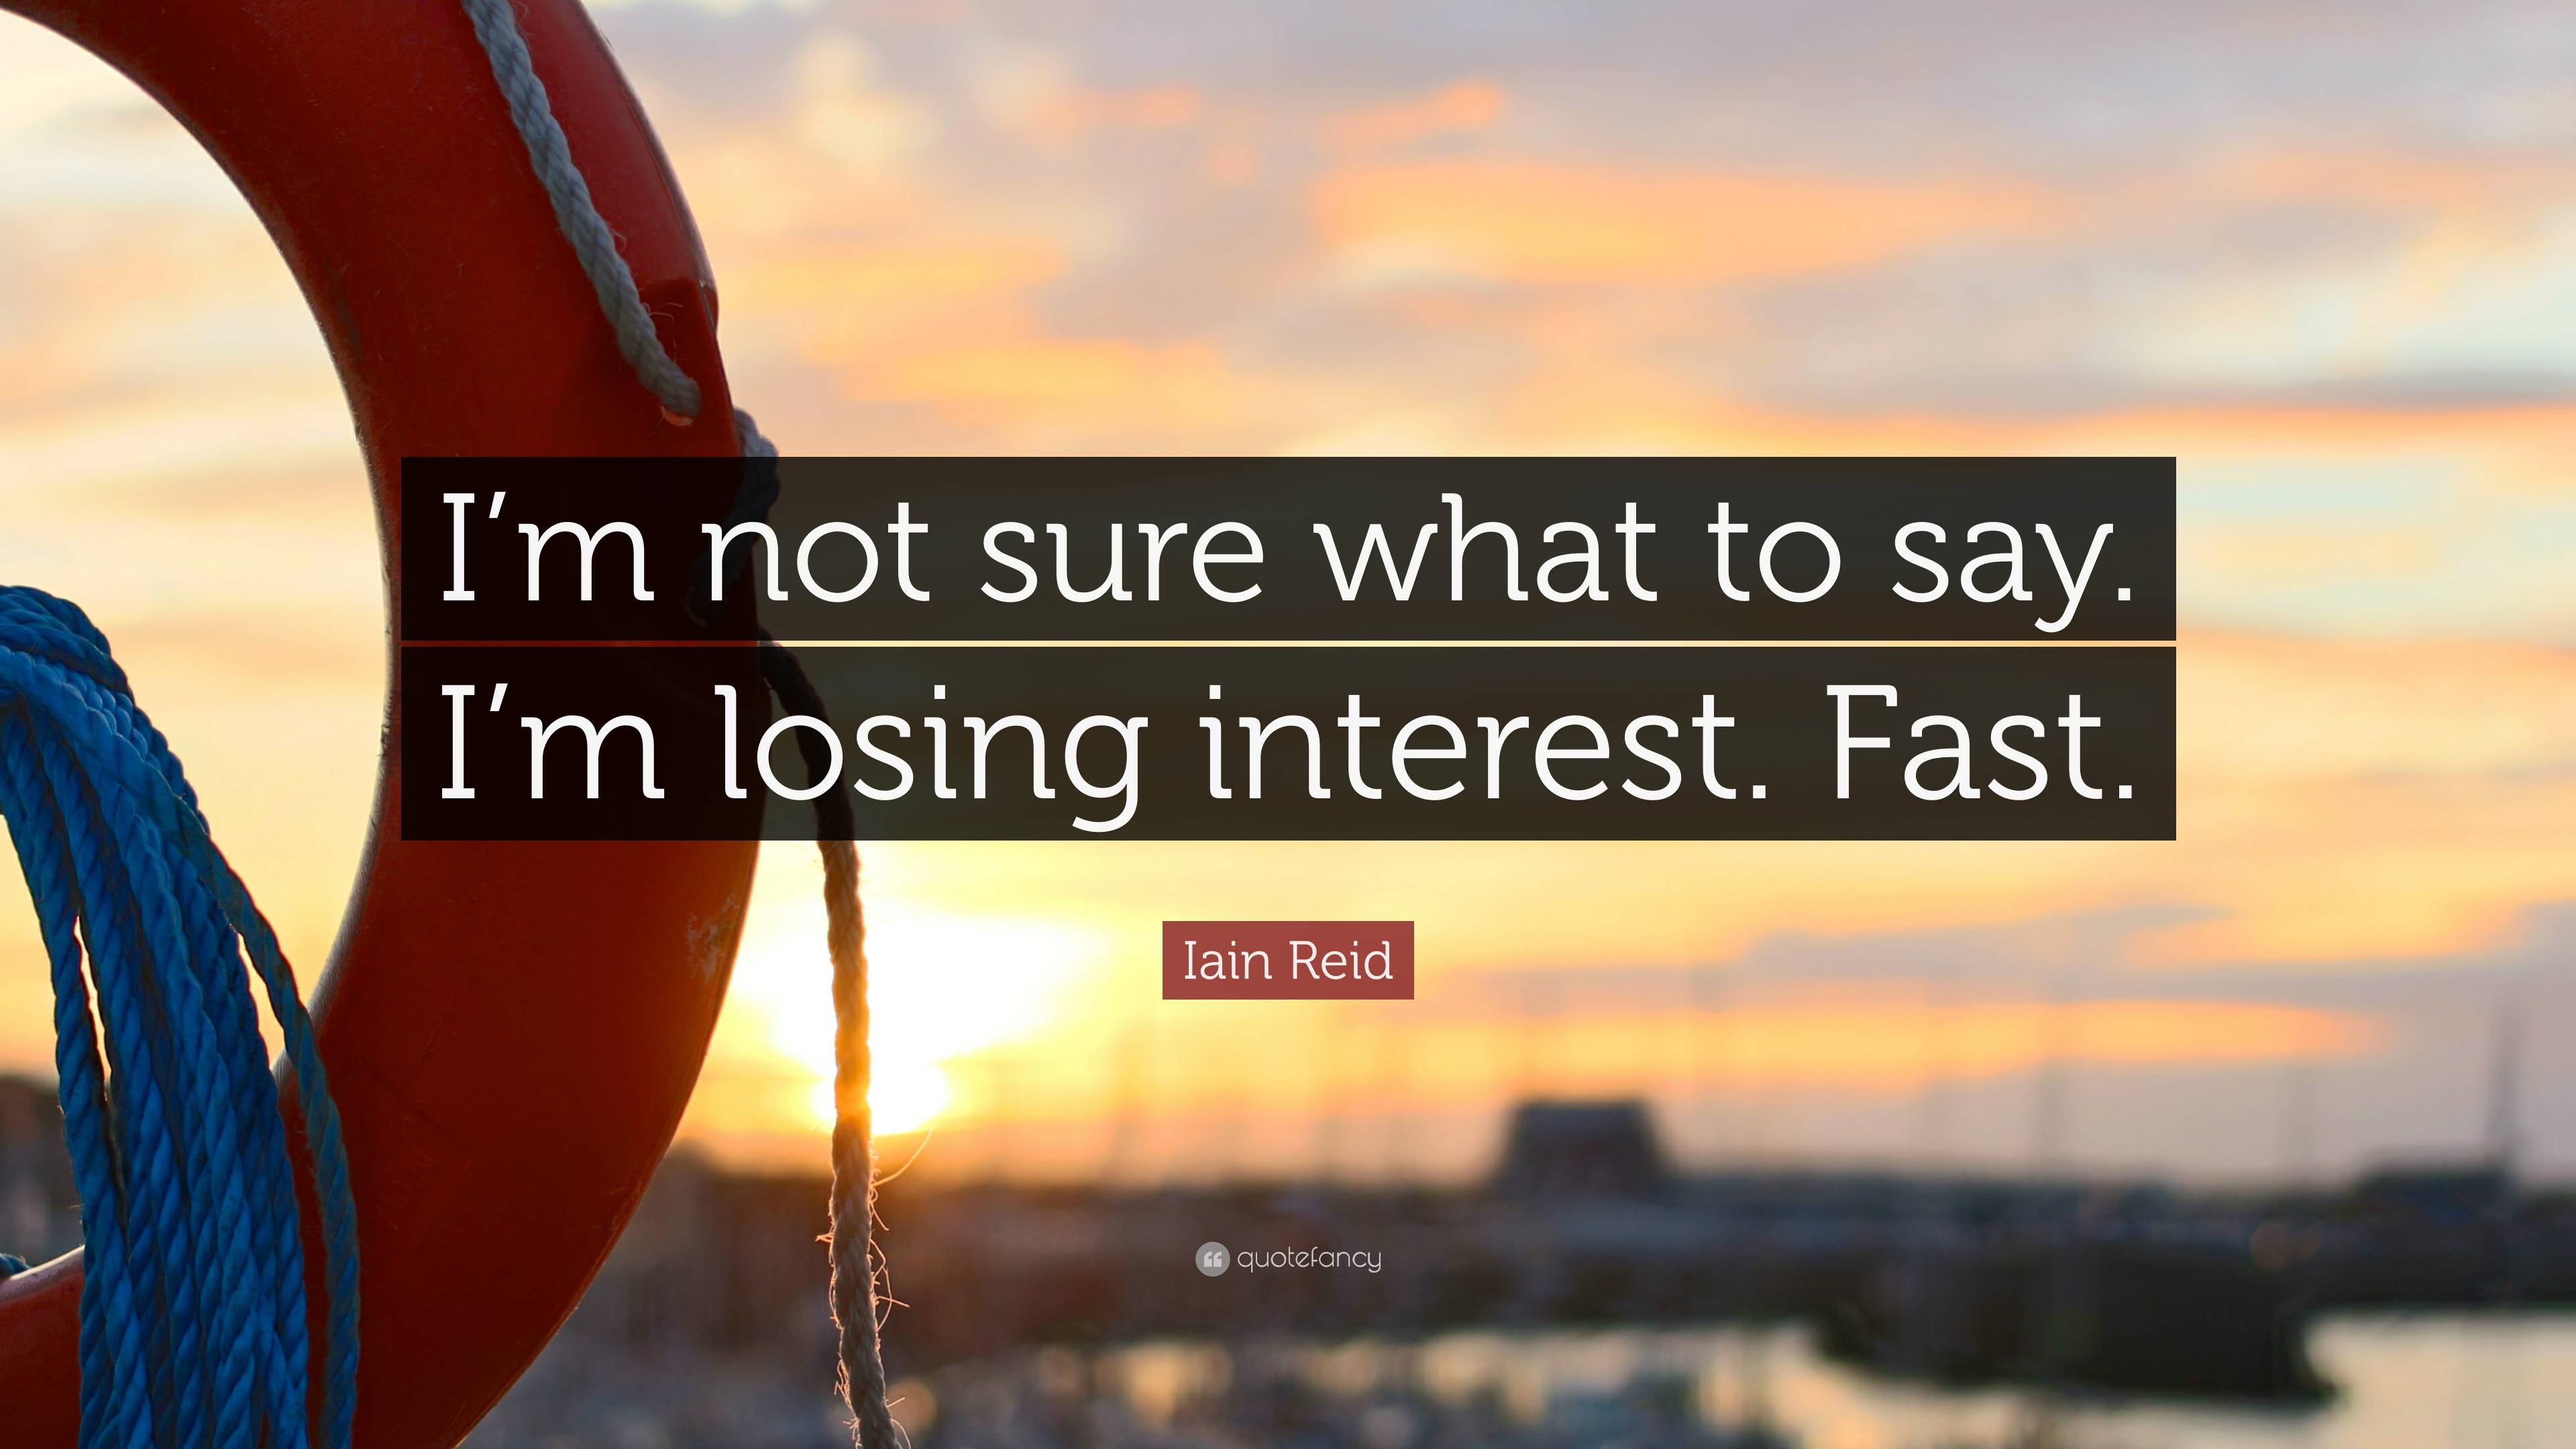 Iain Reid Quote: “I'm not sure what to say. I'm losing interest